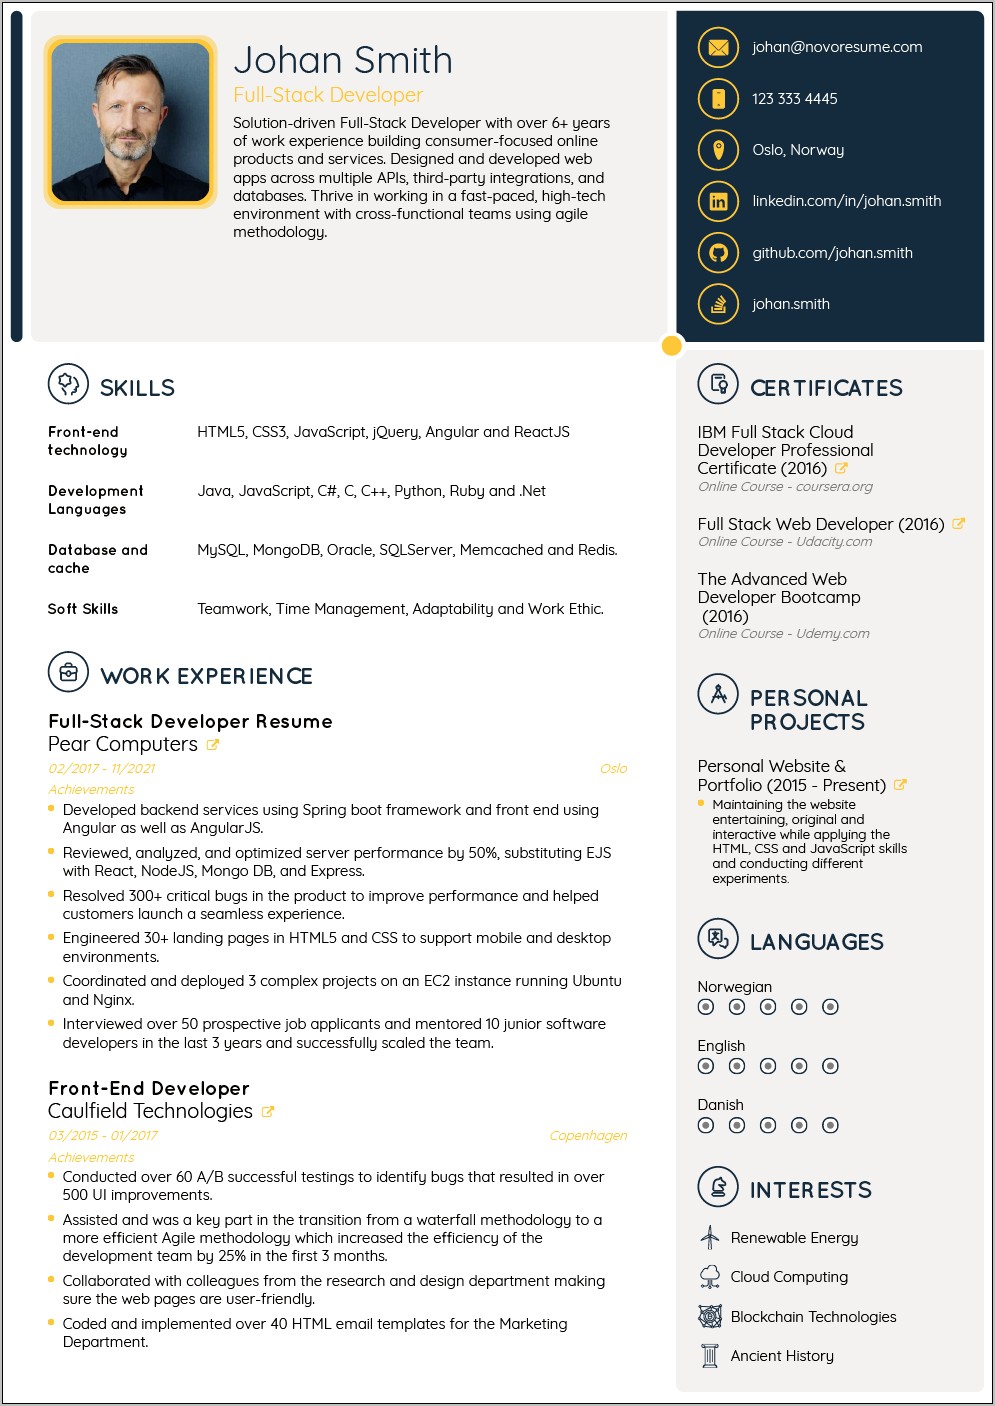 Professional Resume Template Free Online